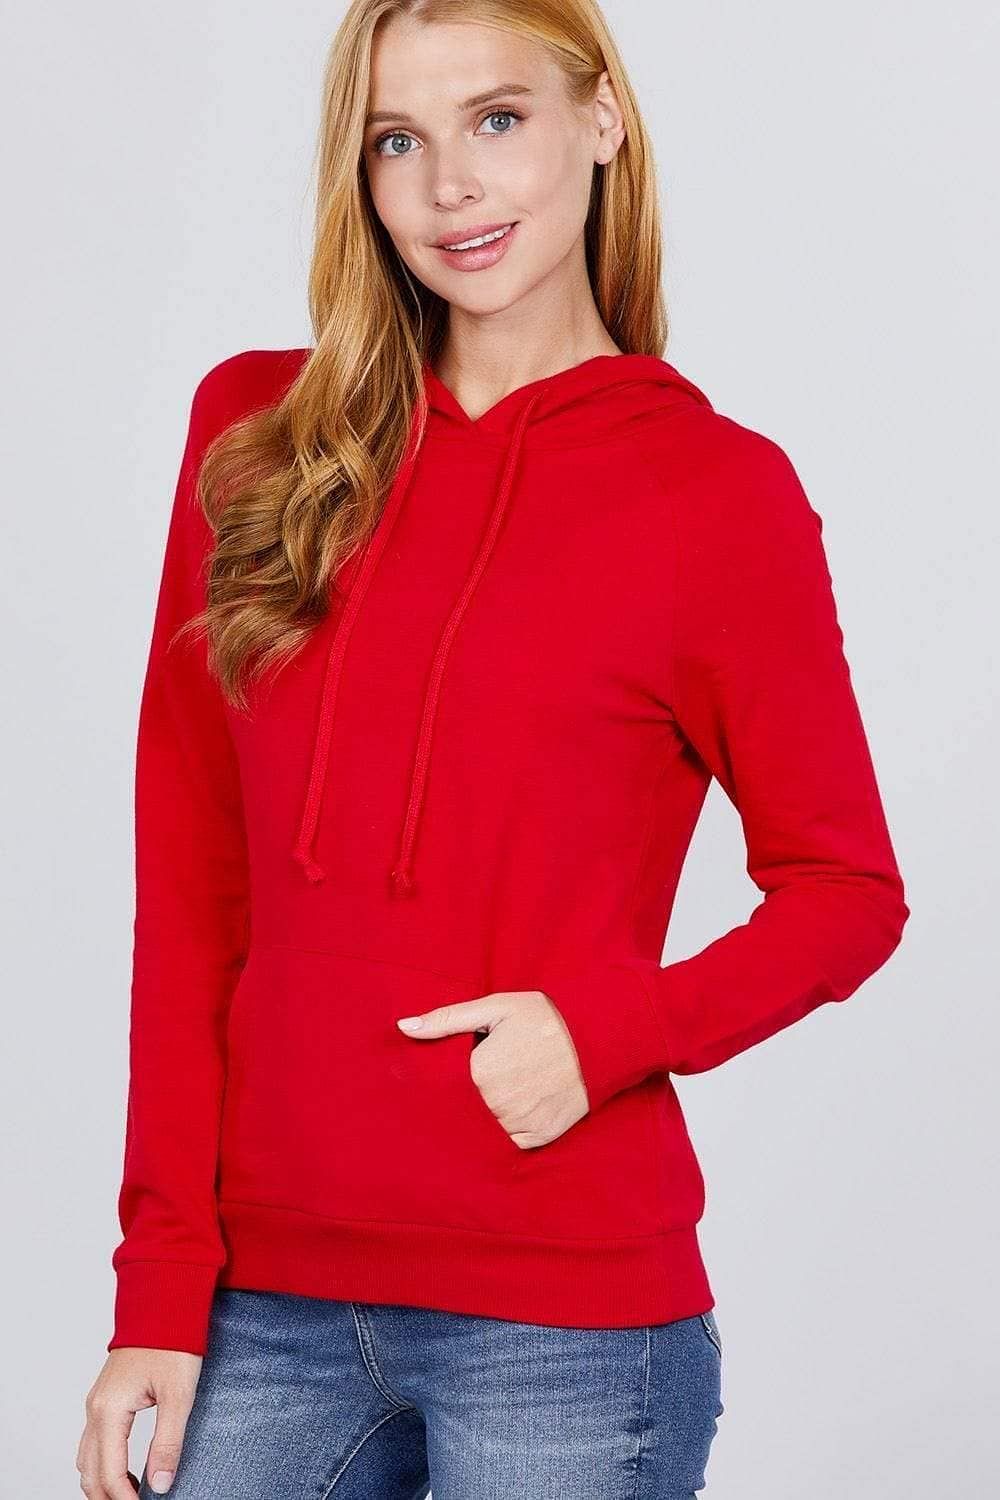 Red French Terry Long Sleeve Sweatshirt - Shopping Therapy M Sweatshirt